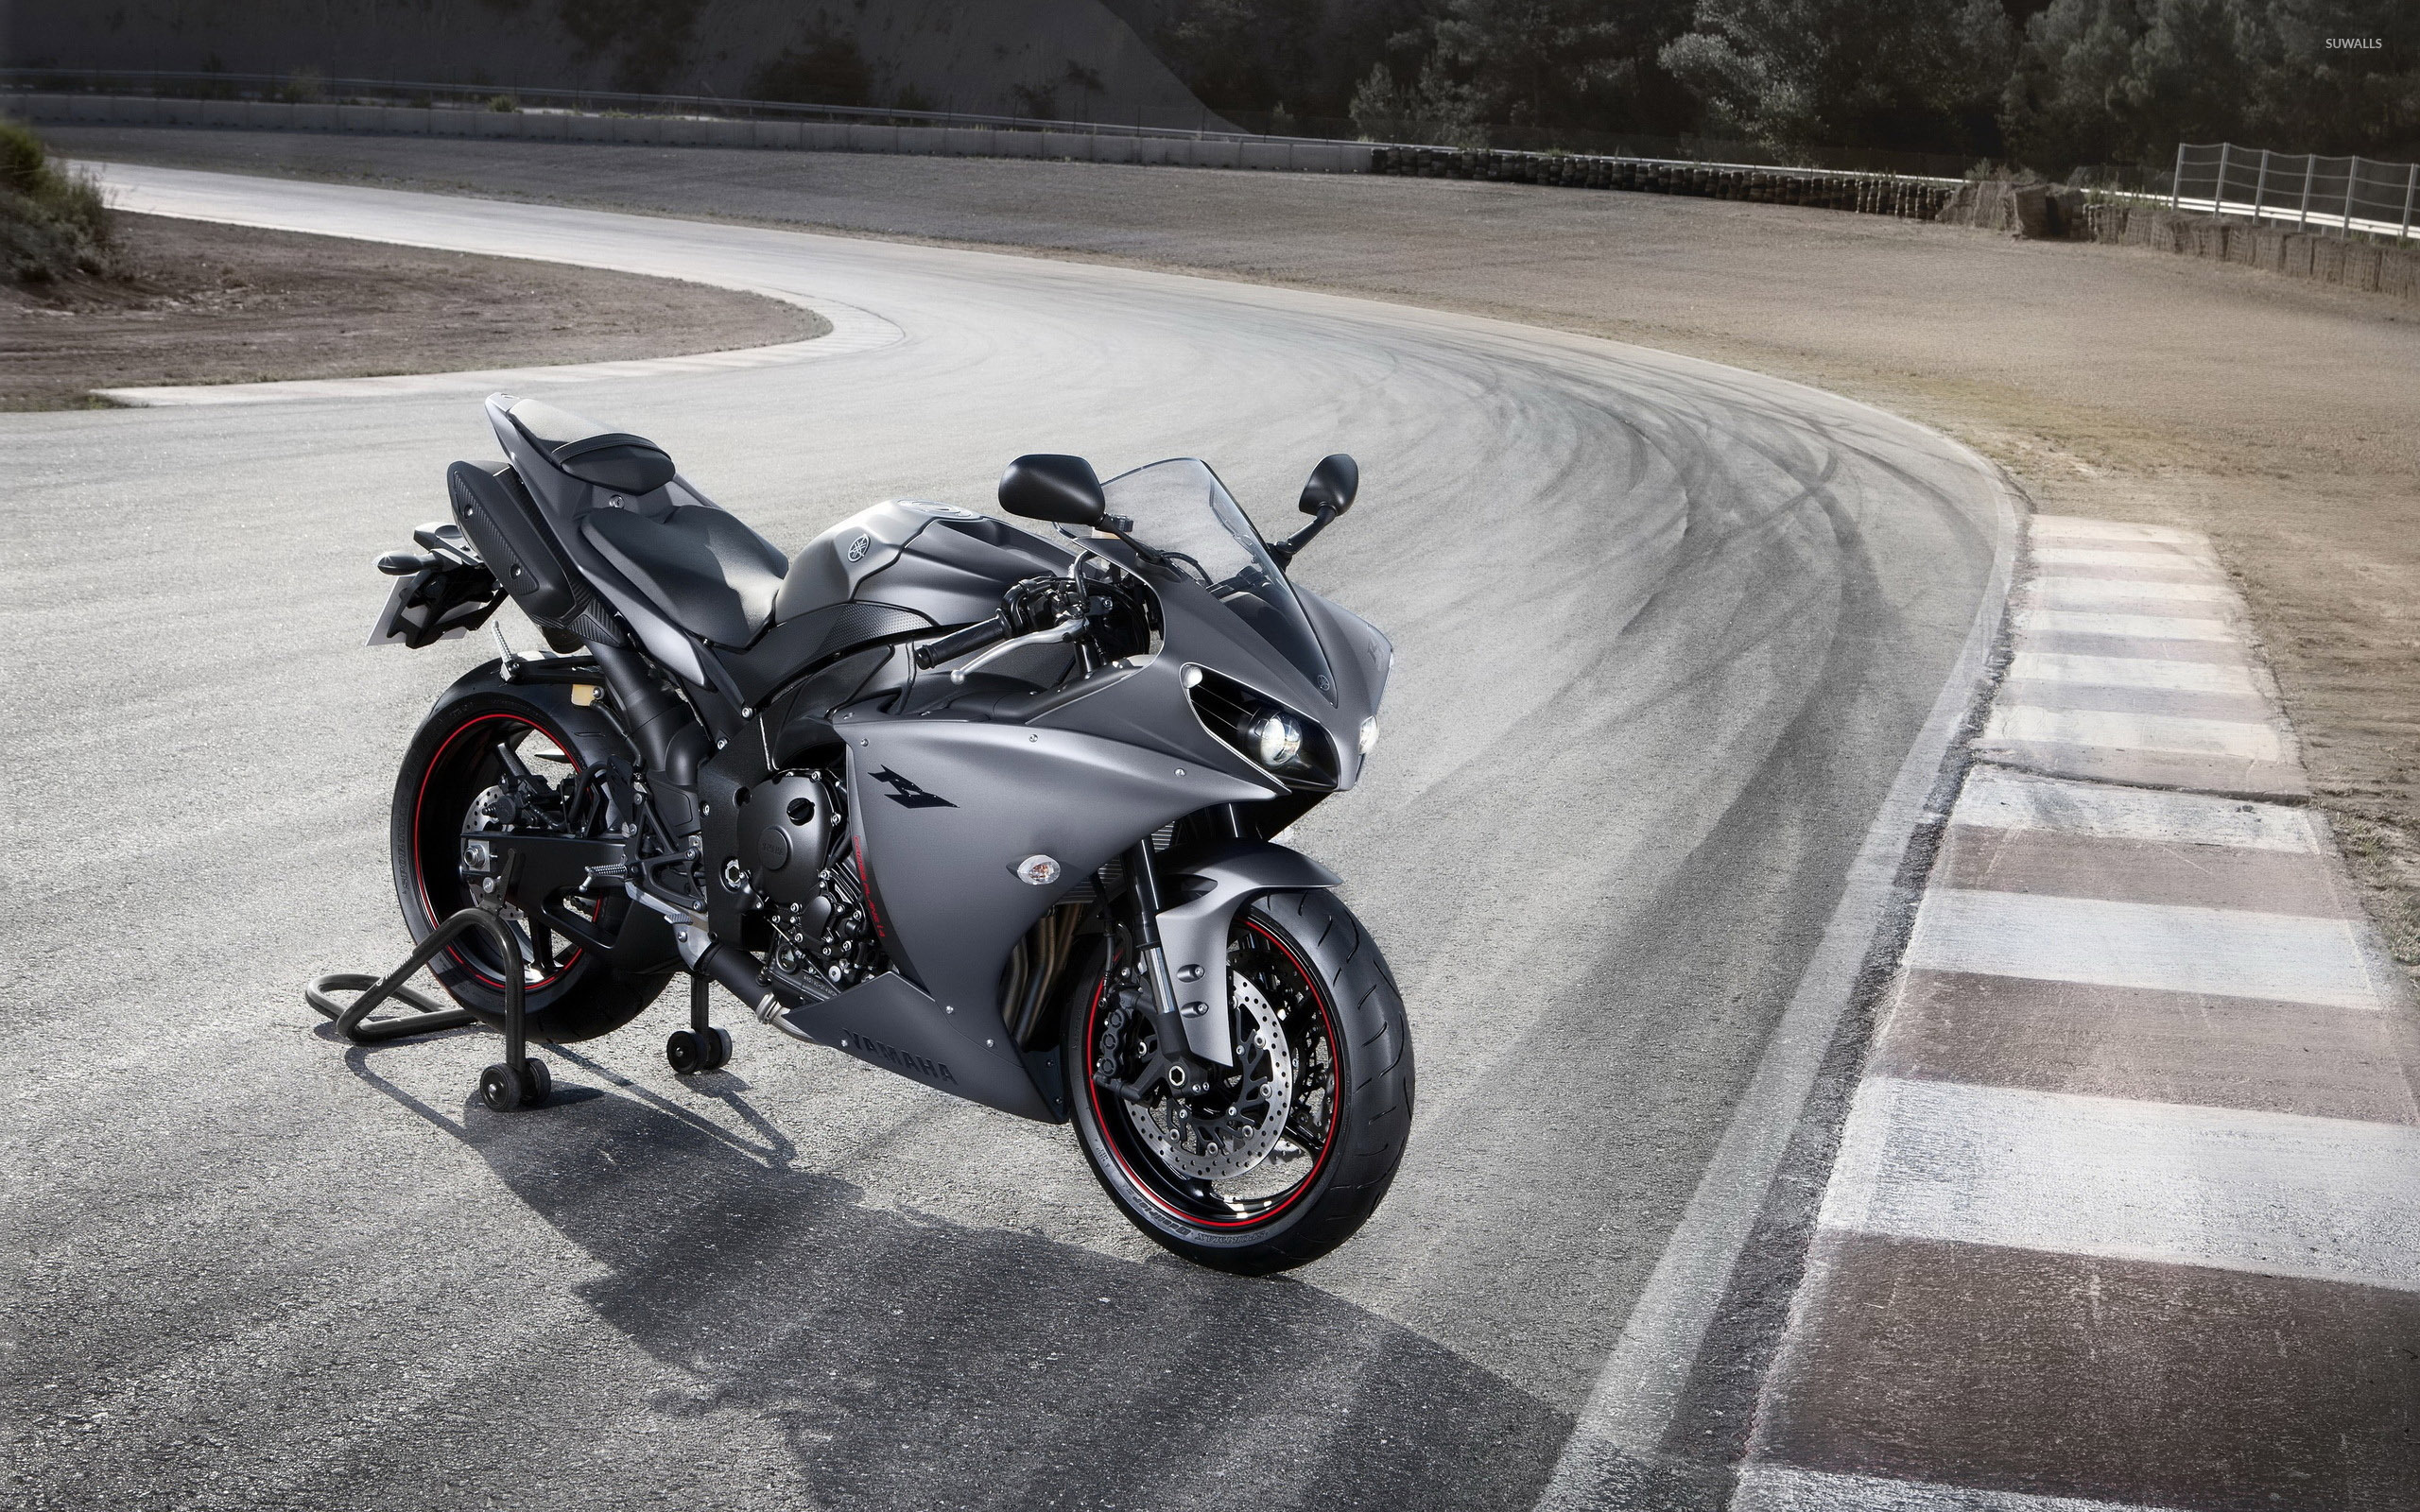 Silver Yamaha YZF R1 On The Racing Track Wallpaper